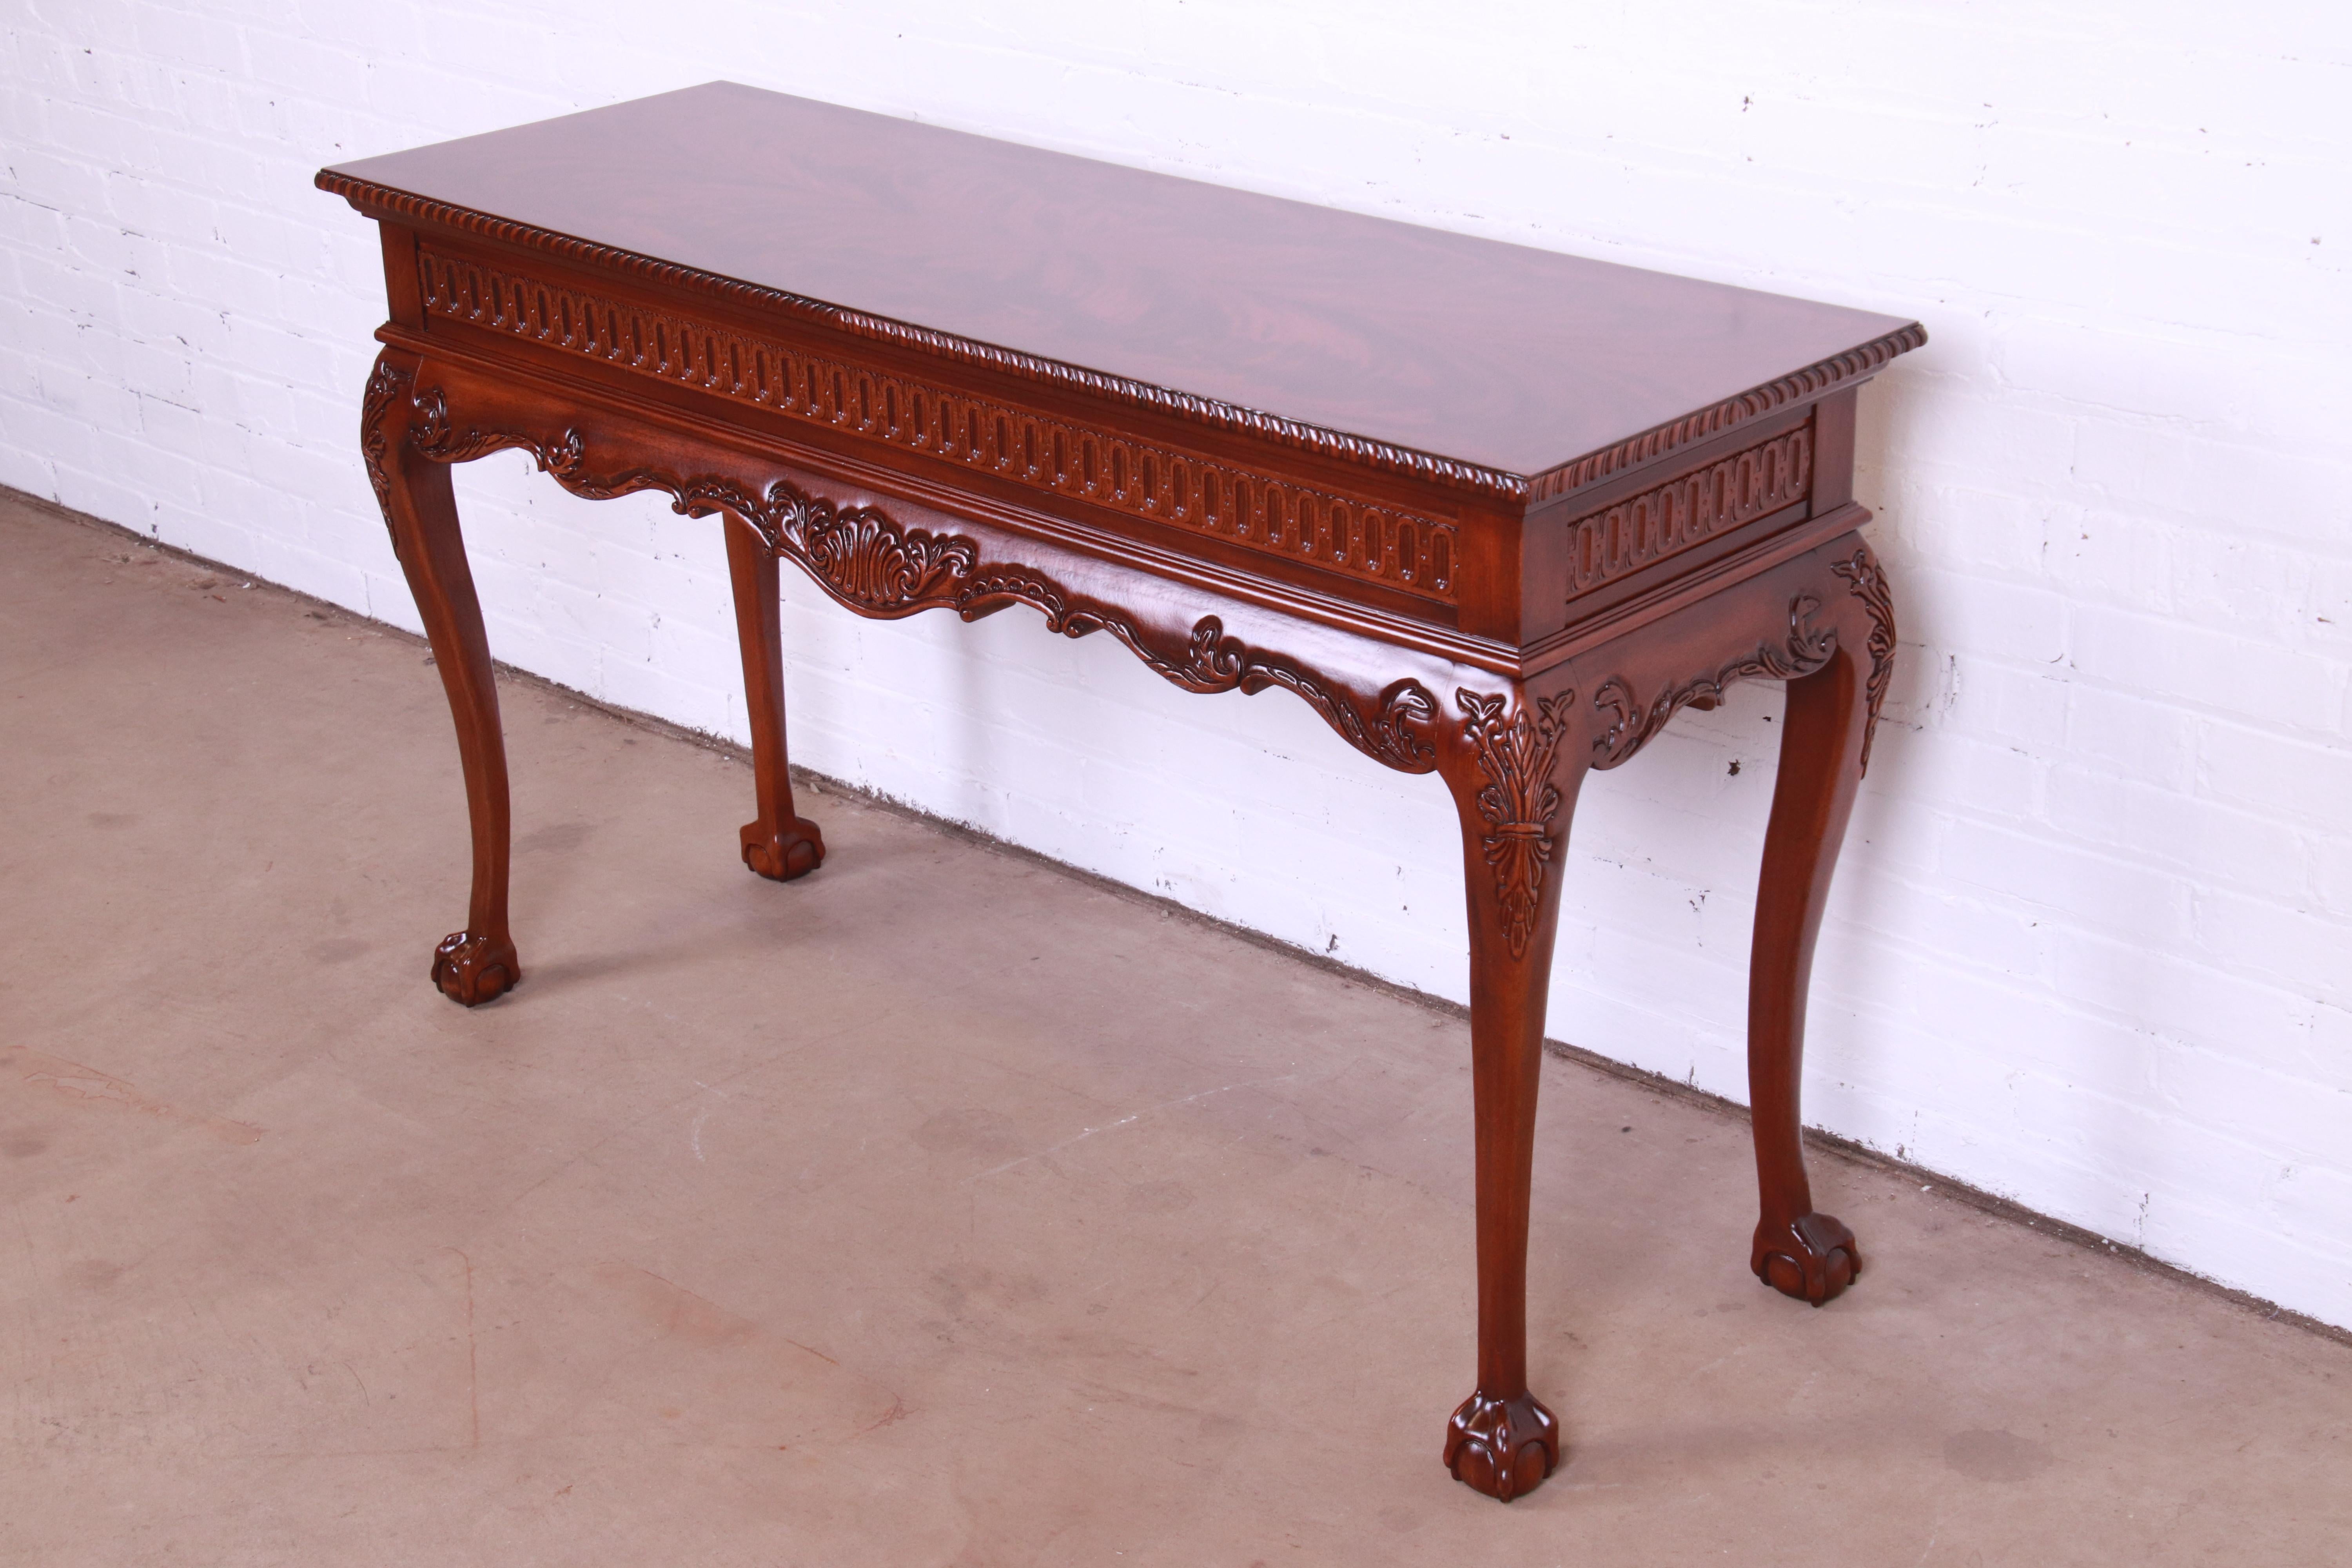 A gorgeous Chippendale style console or sofa table with ball and claw feet

In the manner of Baker Furniture

USA, Circa 1980s

Carved solid mahogany, with book-matched flame mahogany top.

Measures: 52